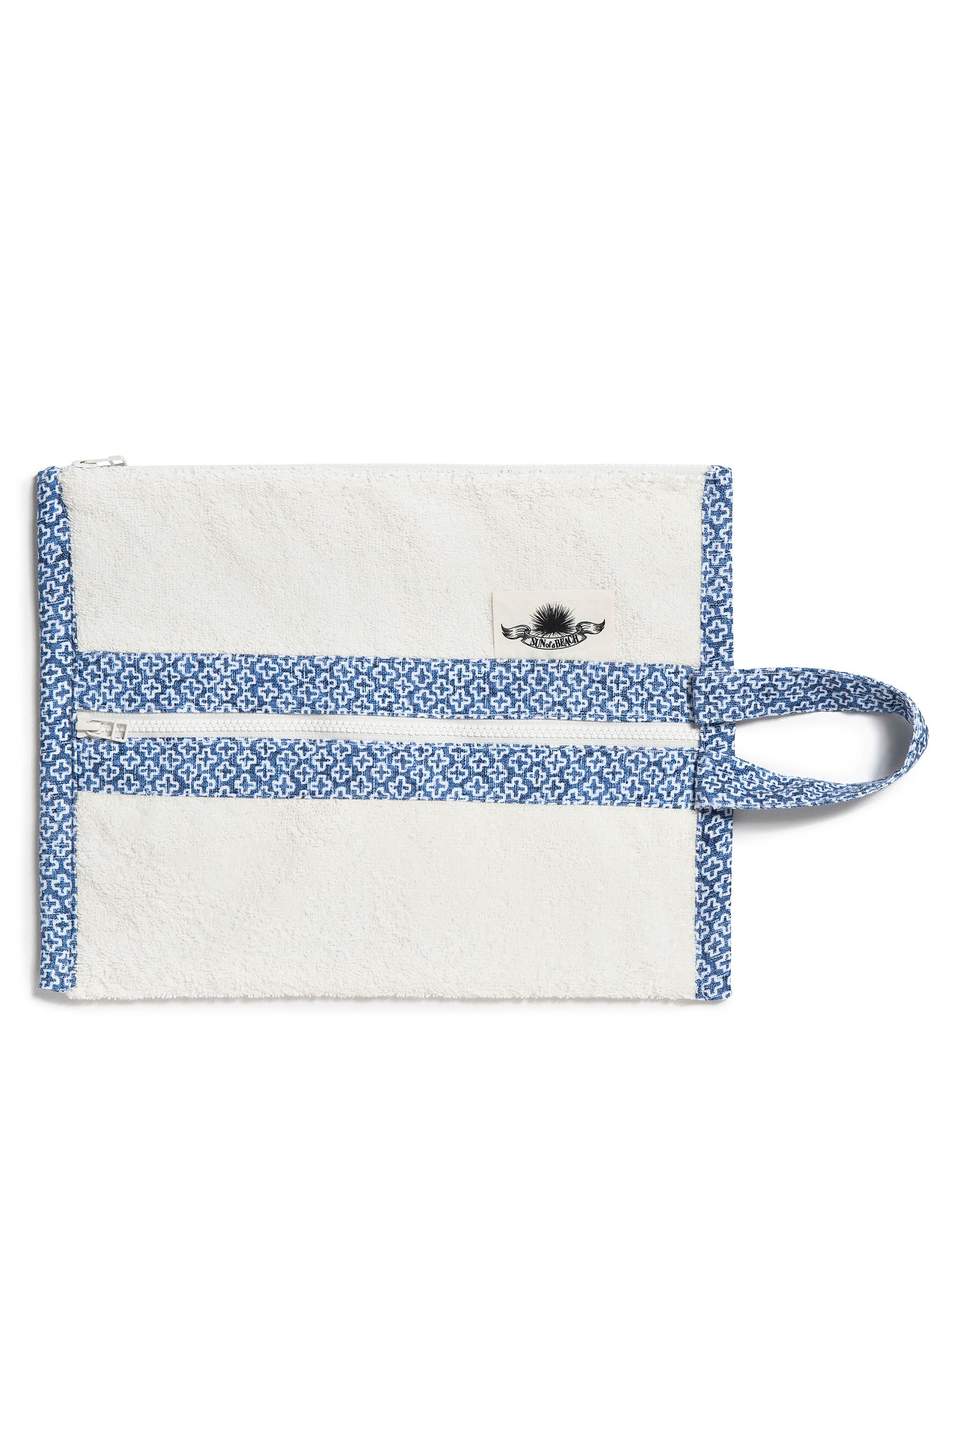 PATMOS DOUBLE WATERPROOF POUCH